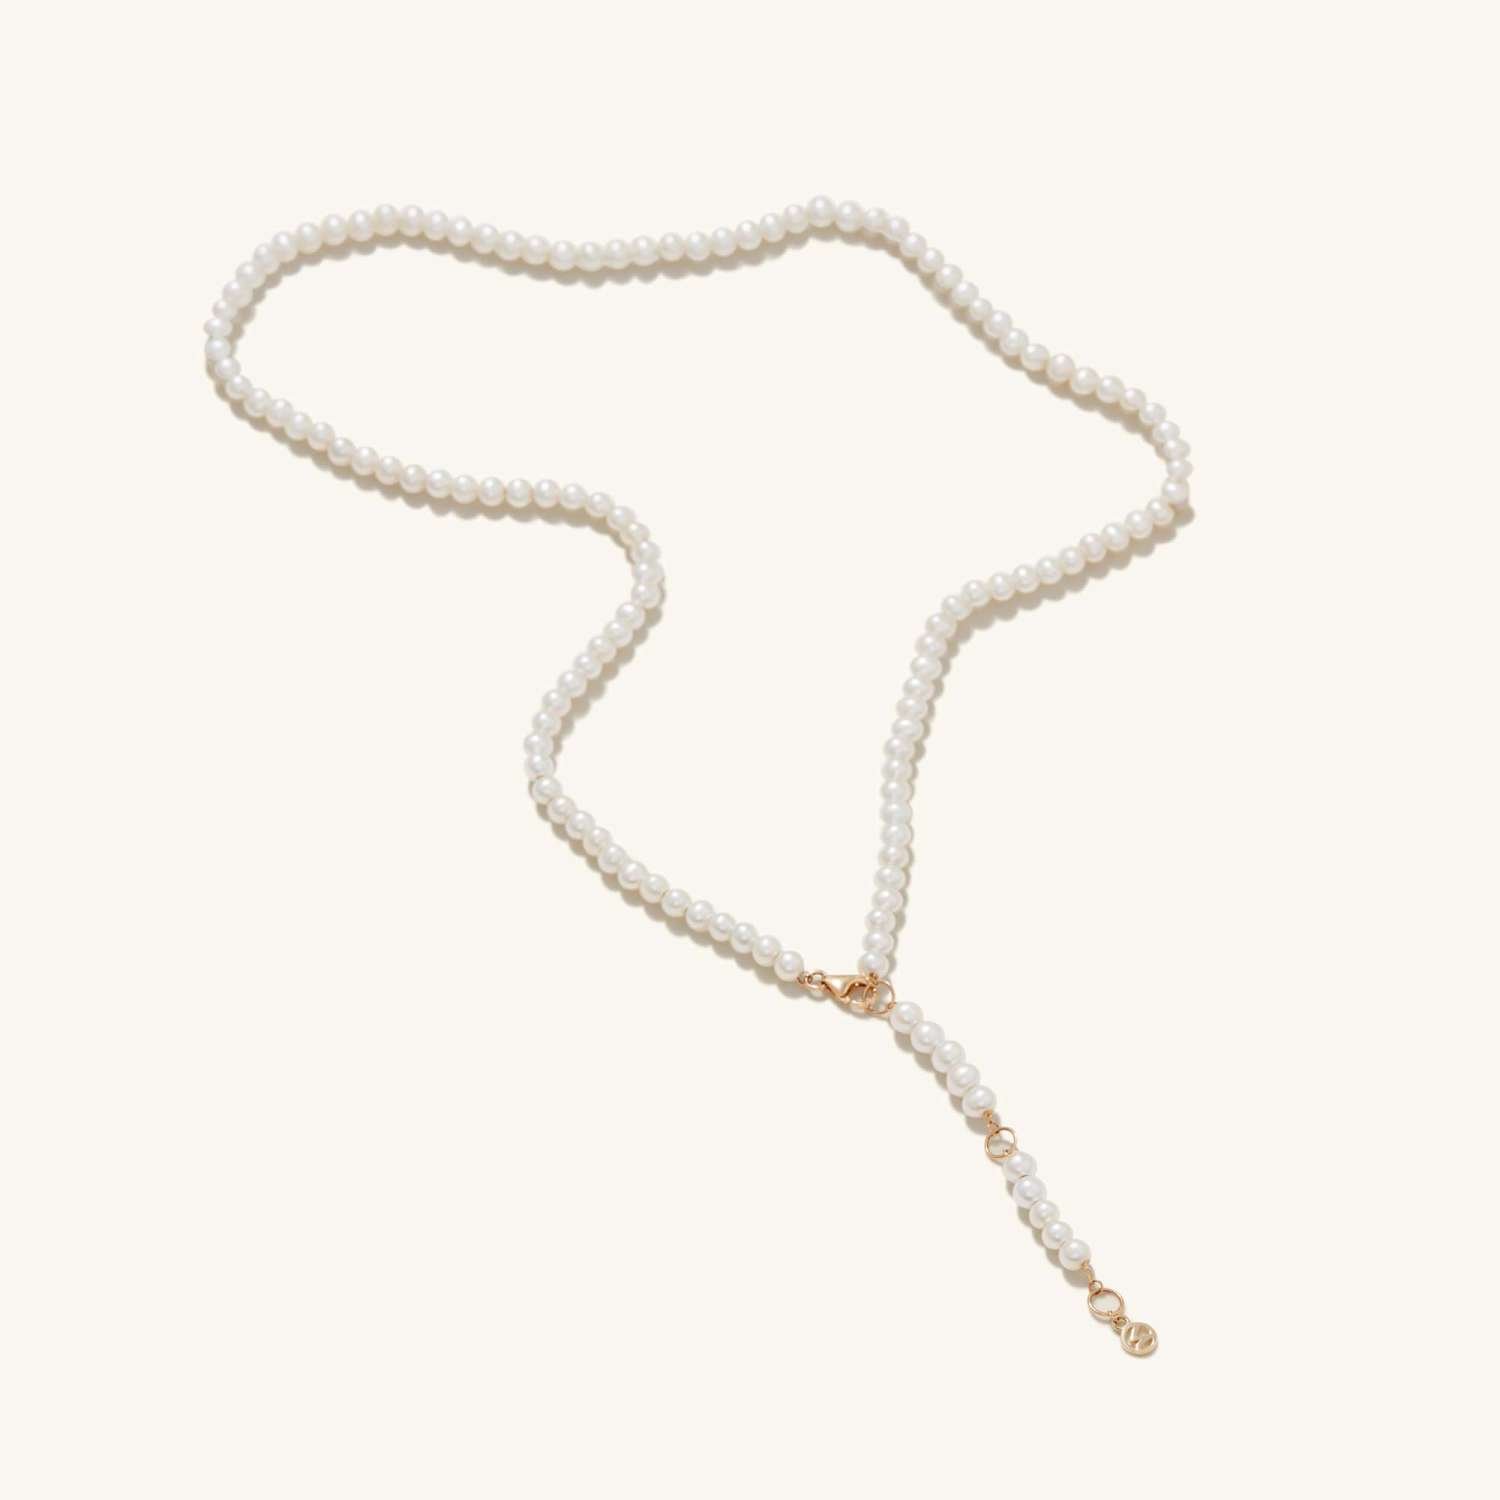 ClassicPearls_necklace_white_yg_alt2_0138.jpg